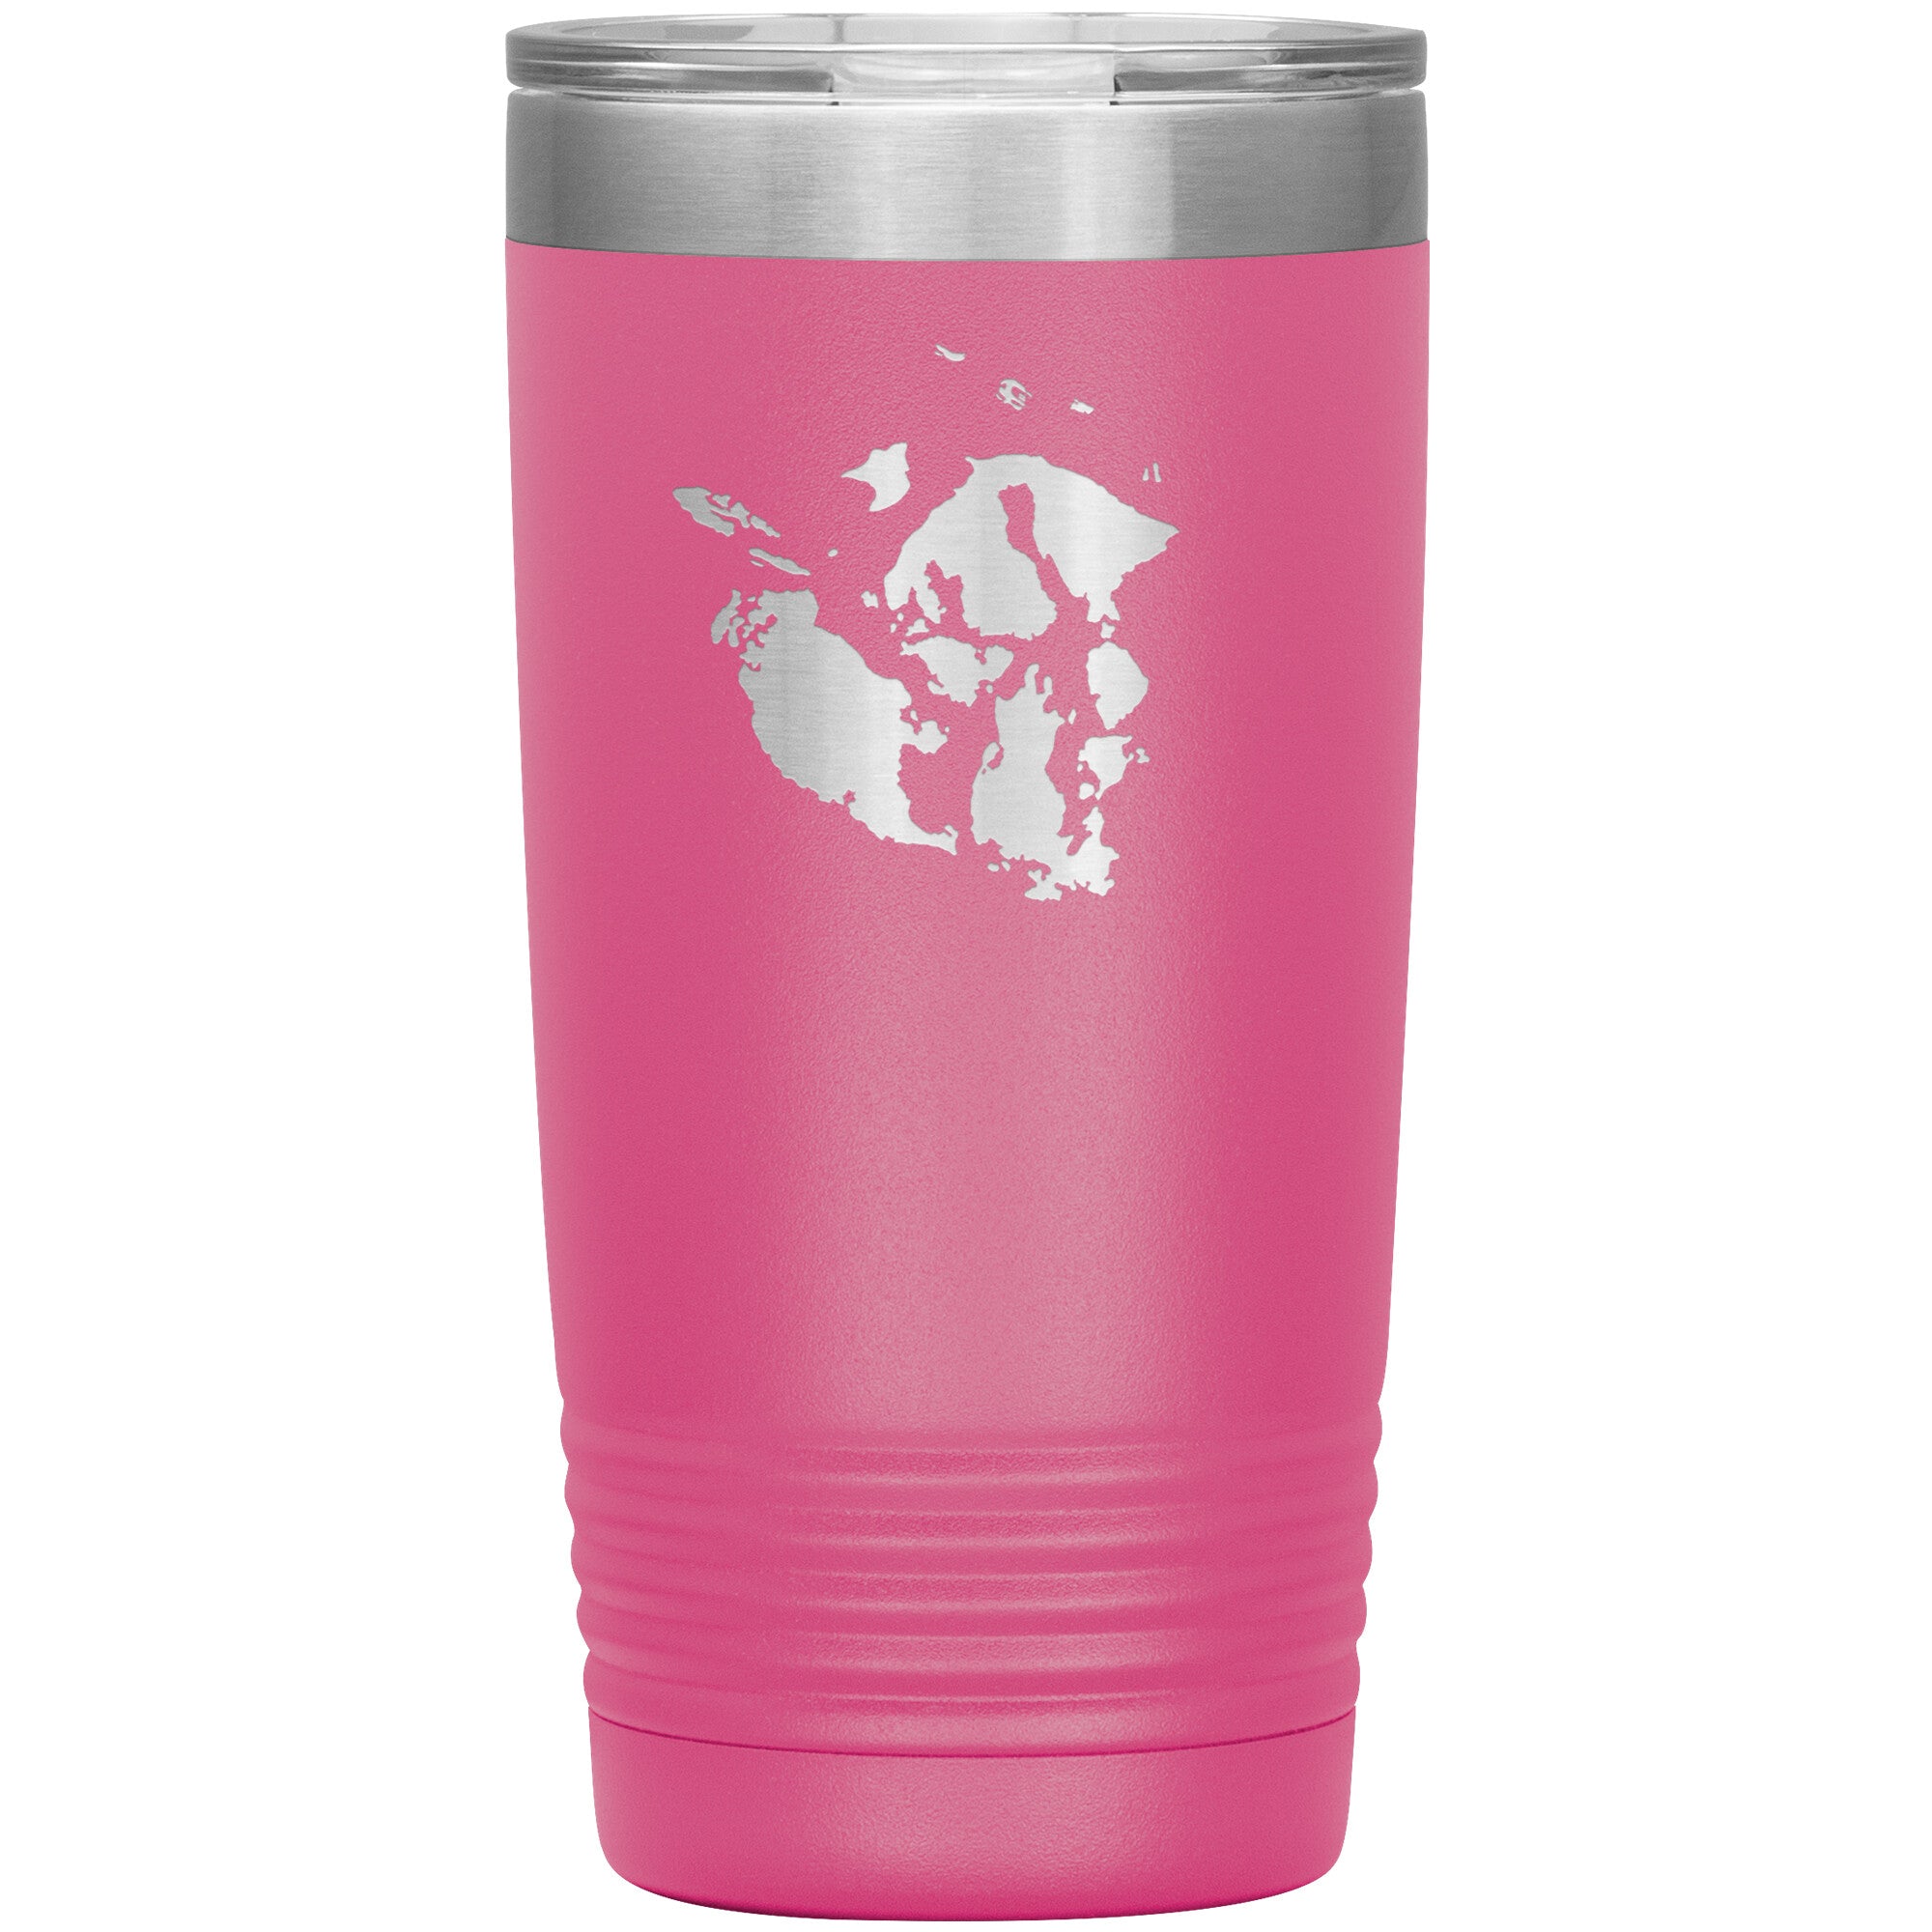 Yeti, Dining, Large Hot Pink Yeti Cup With Lid